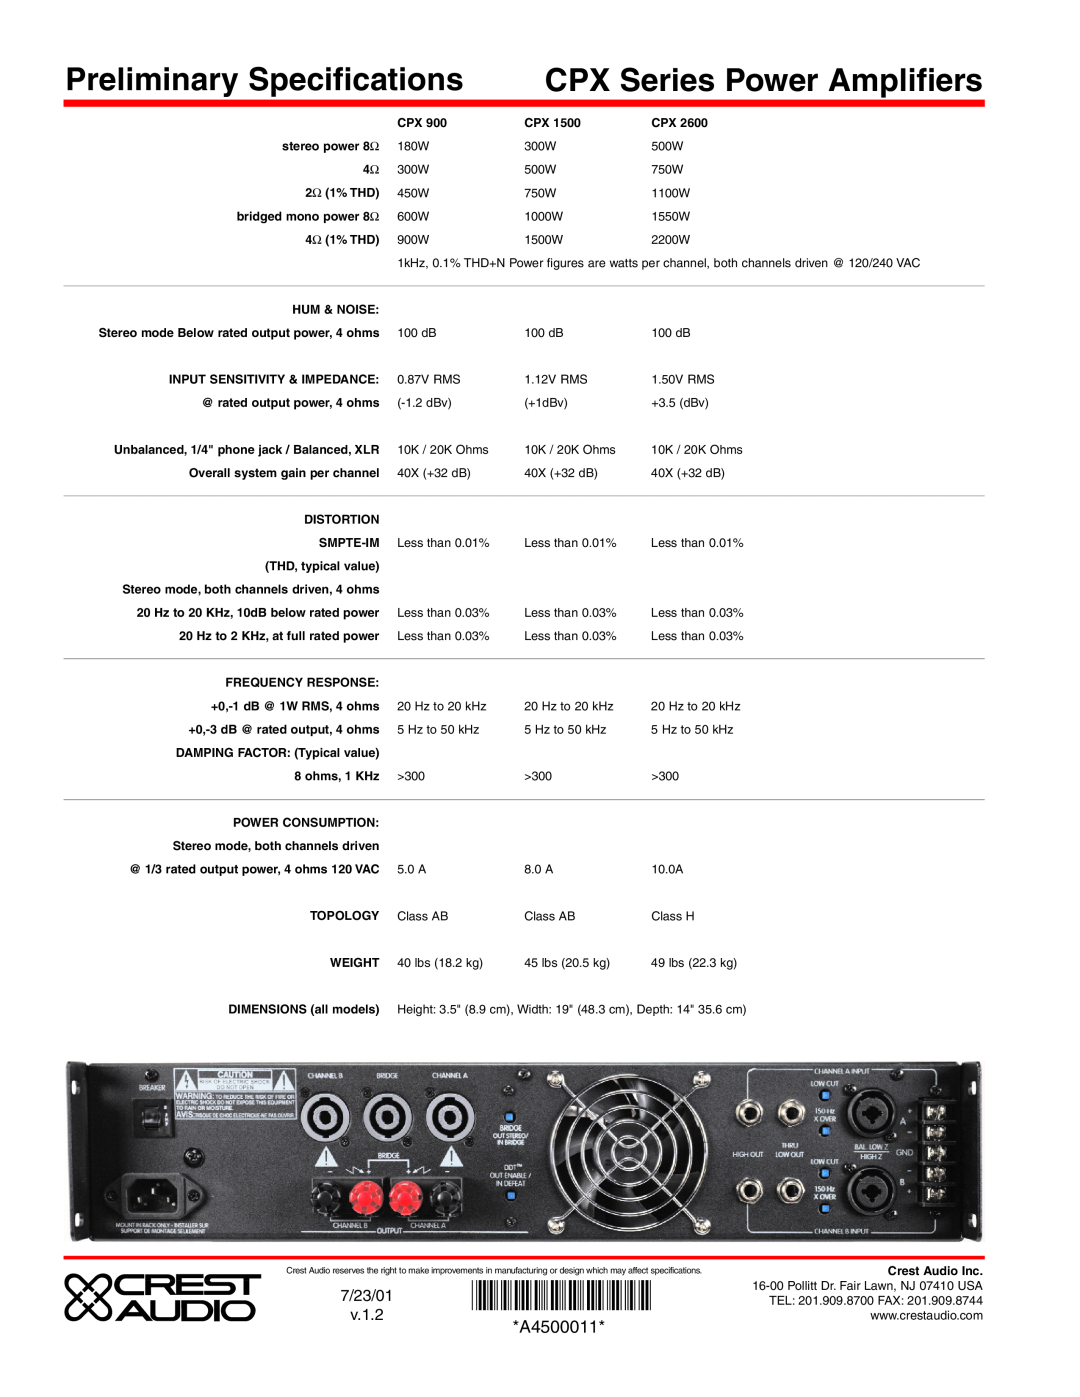 Peavey CPX 1500, CPX 2600, CPX 900 specifications Preliminary Specifications, CPX Series Power Amplifiers, A4500011 